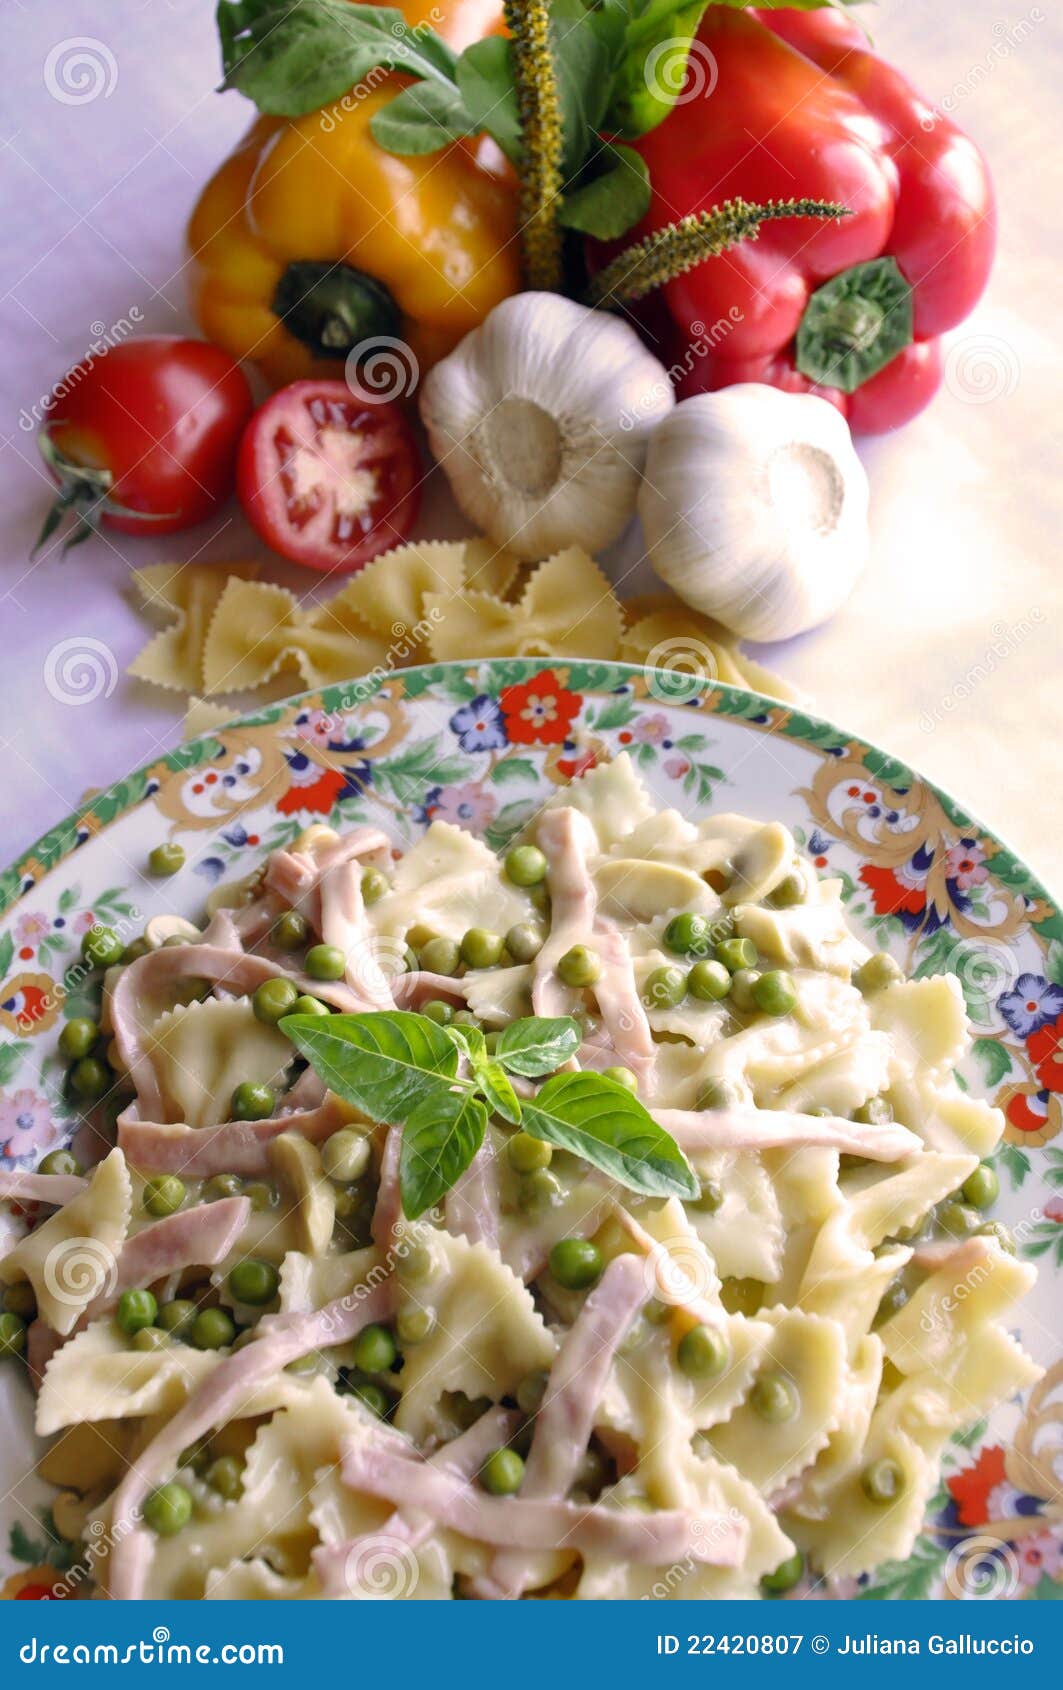 Pasta With Fresh Vegetables Stock Image - Image of fresh, natural: 22420807